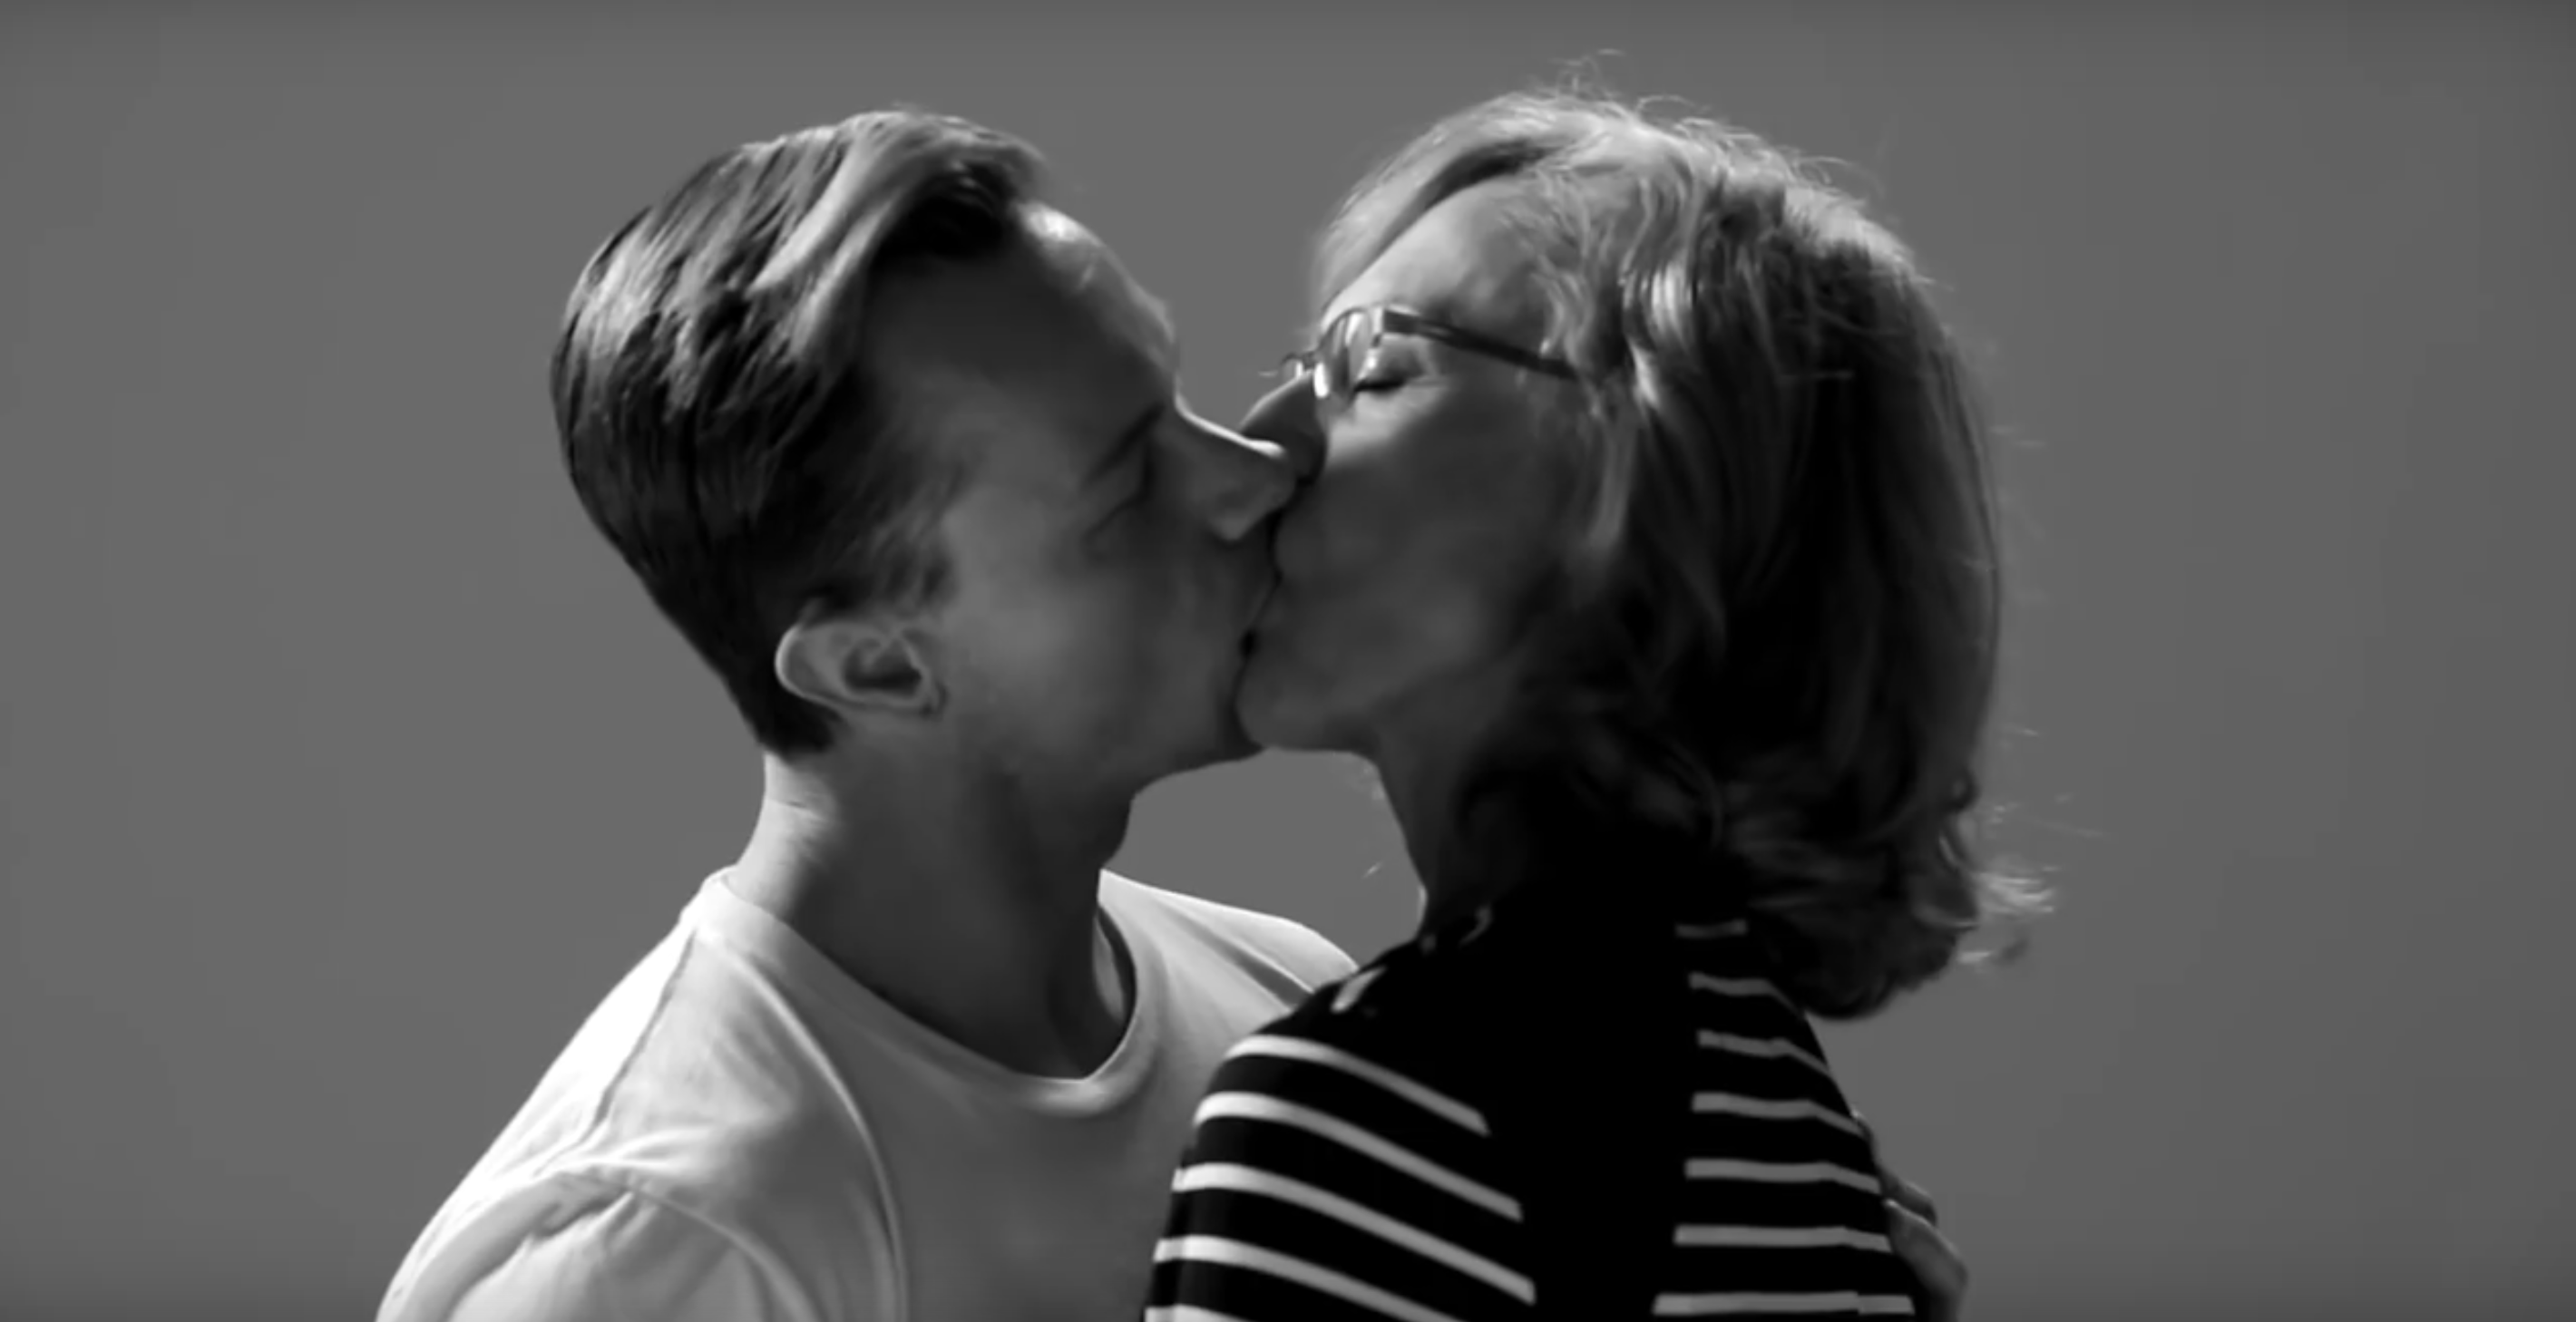 Mom french kisses son